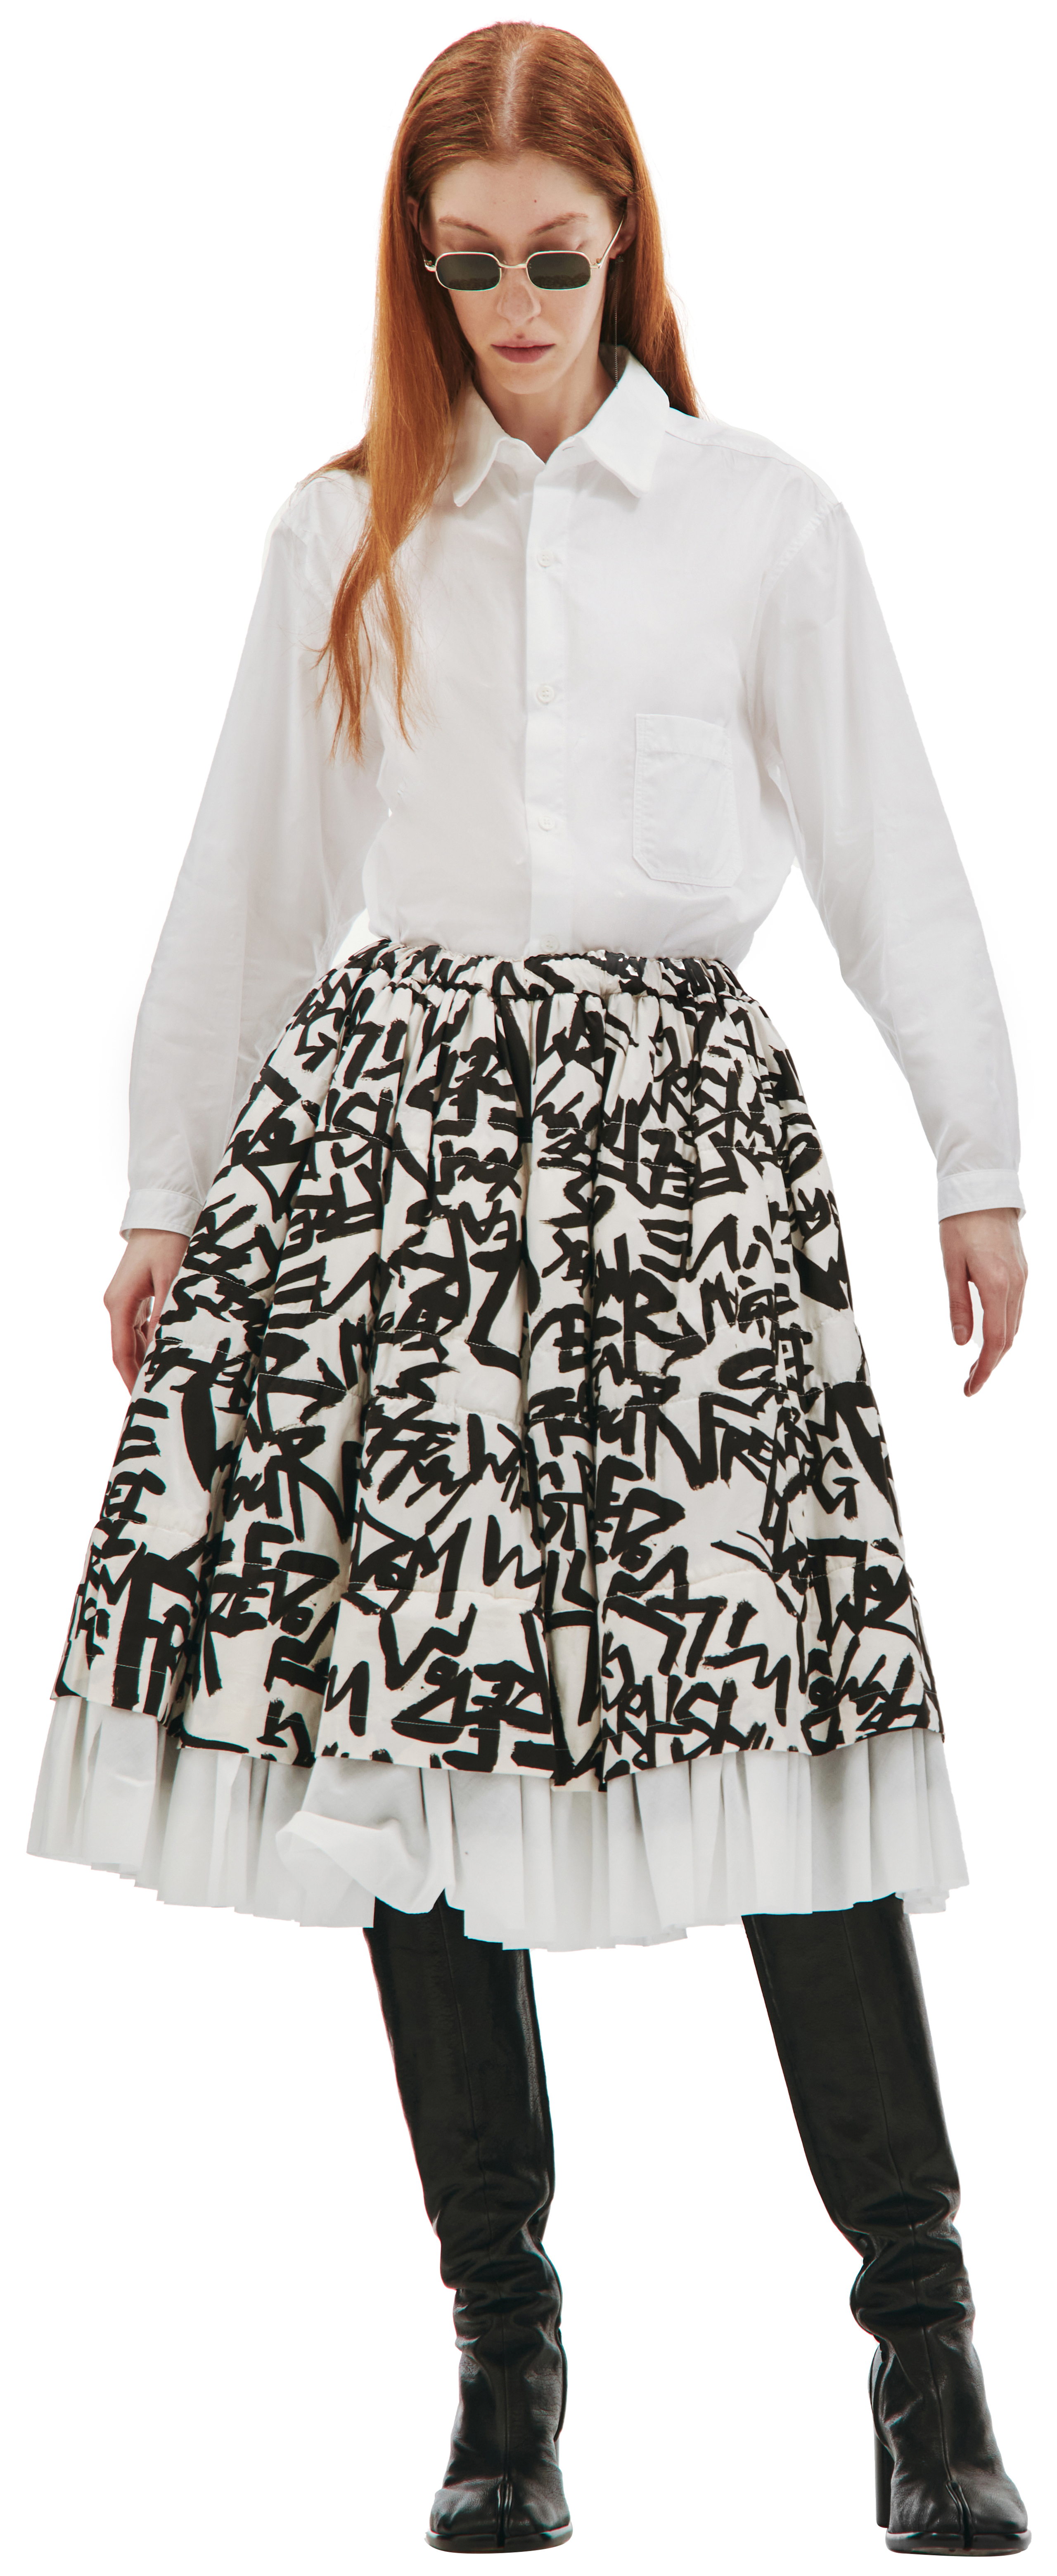 Printed Skirt with ruffles